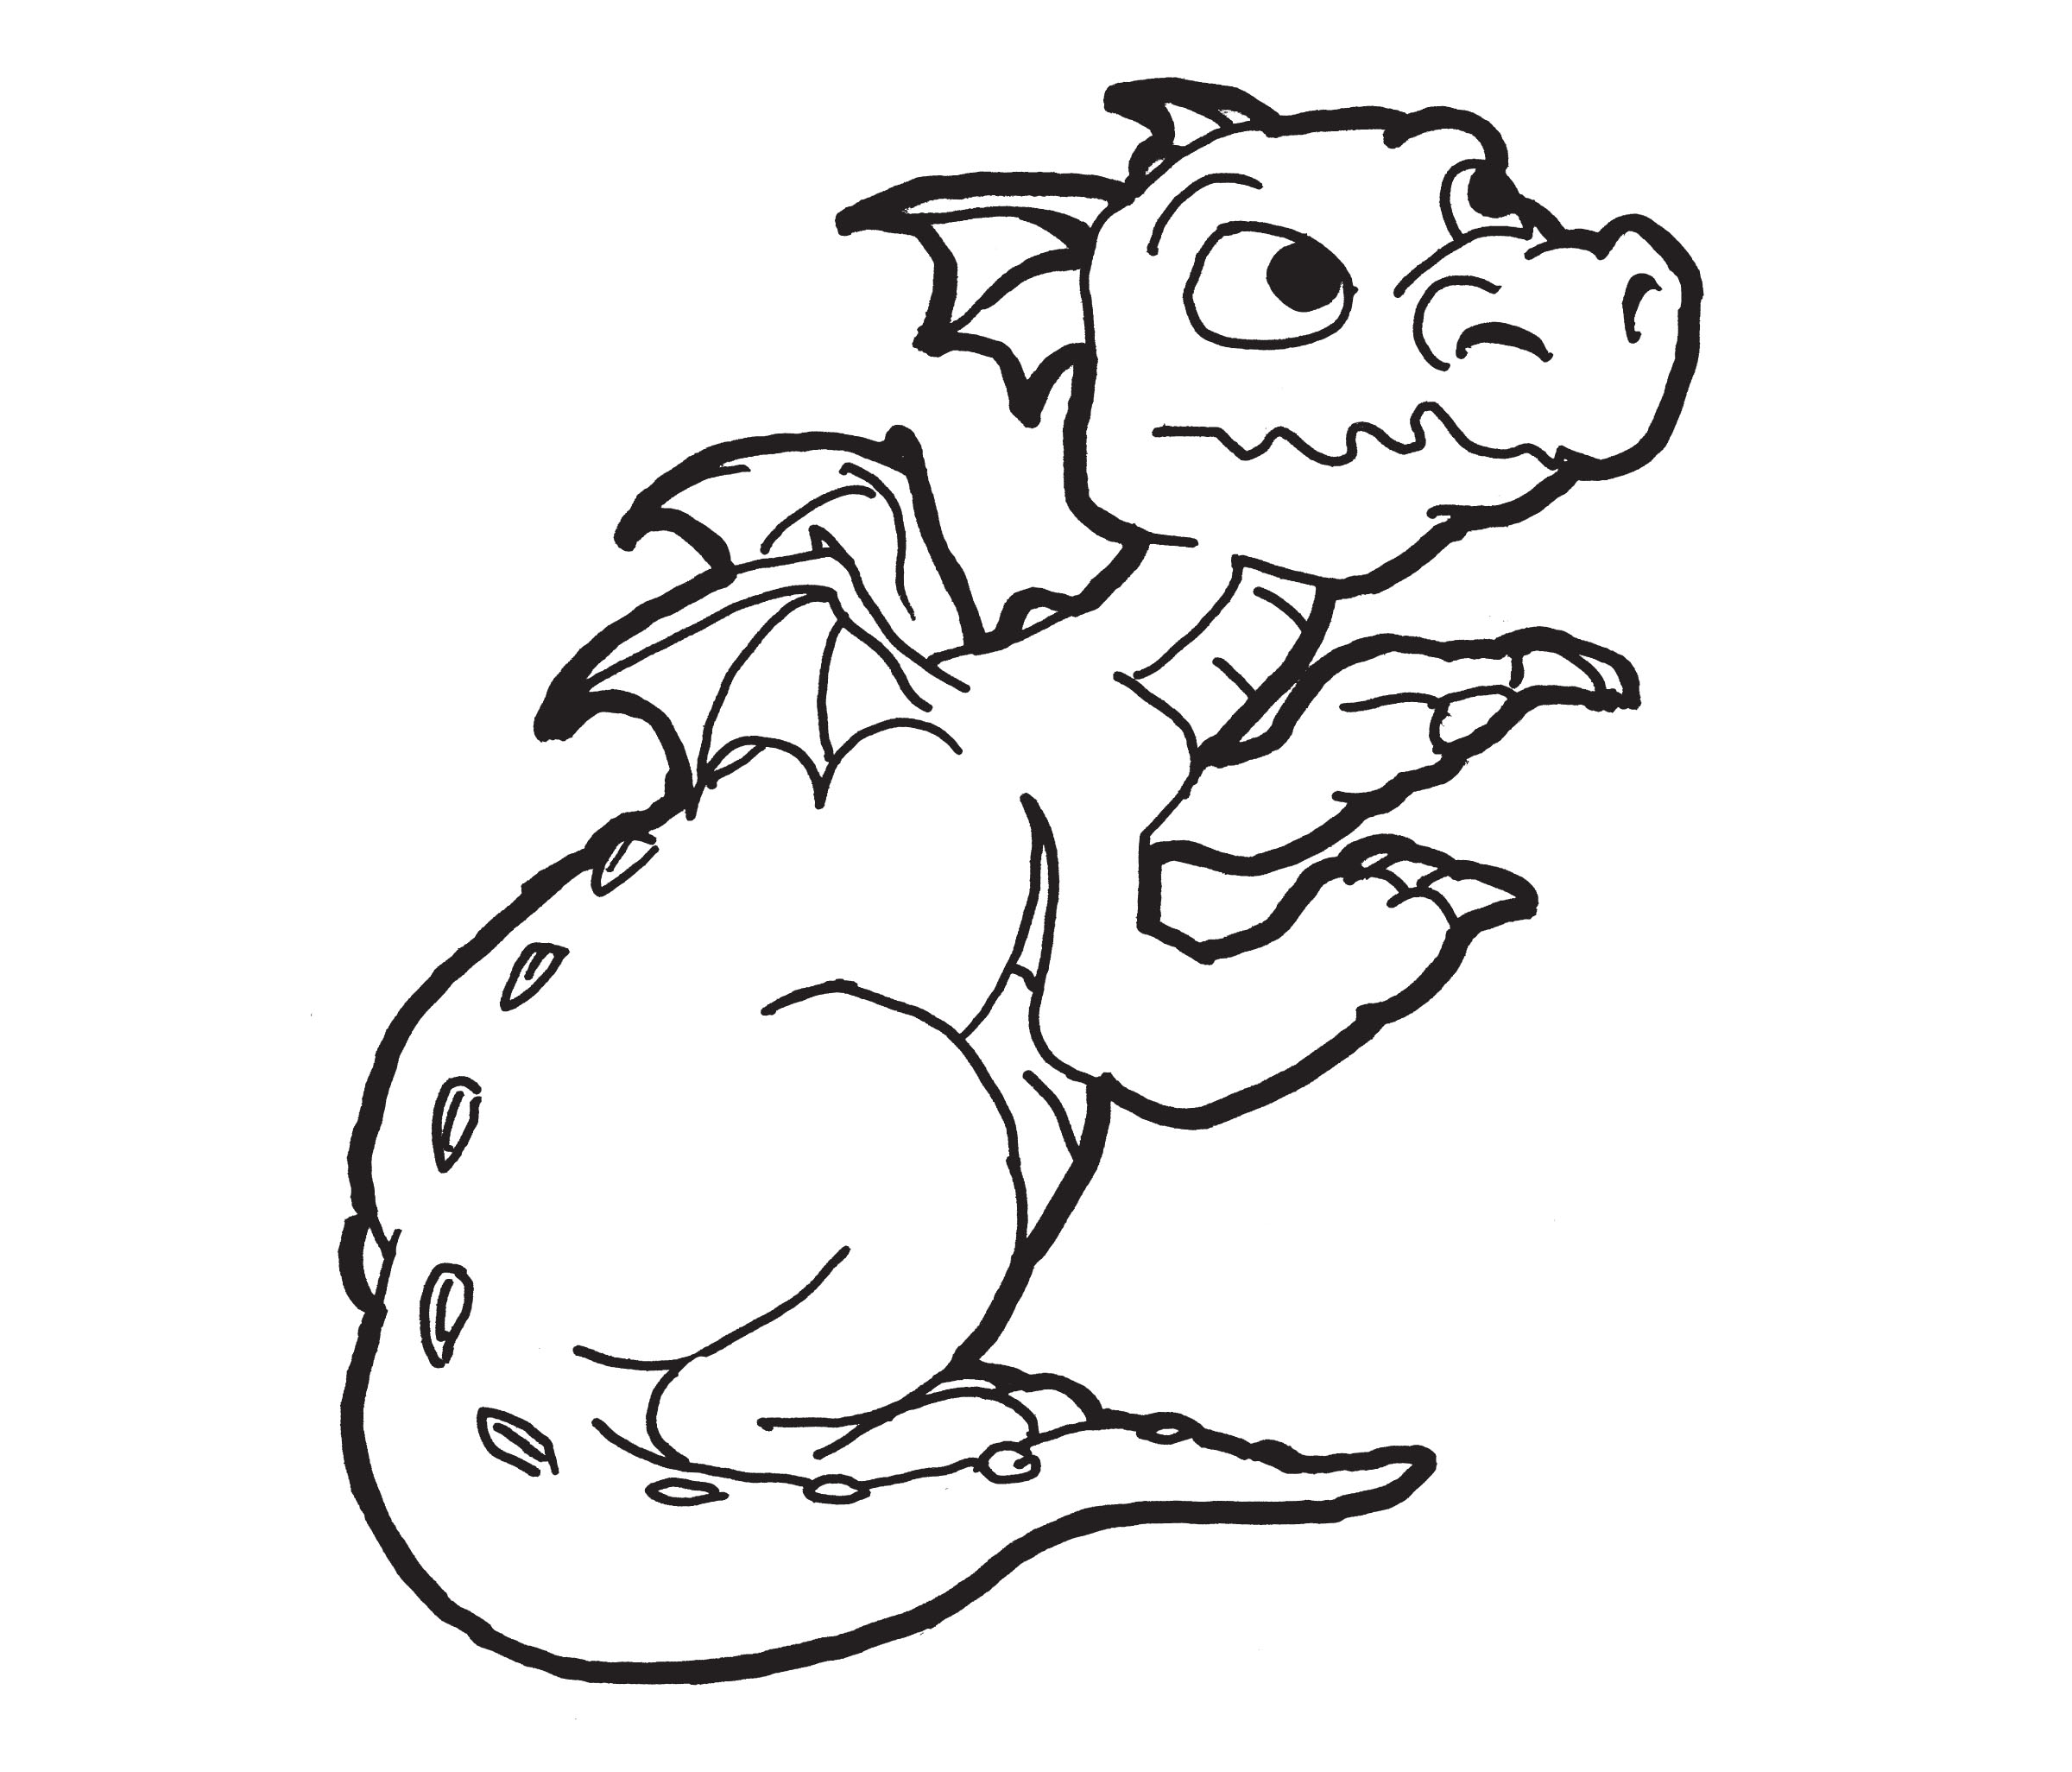 Realistic Dragon Coloring Pages for Adults And Kids